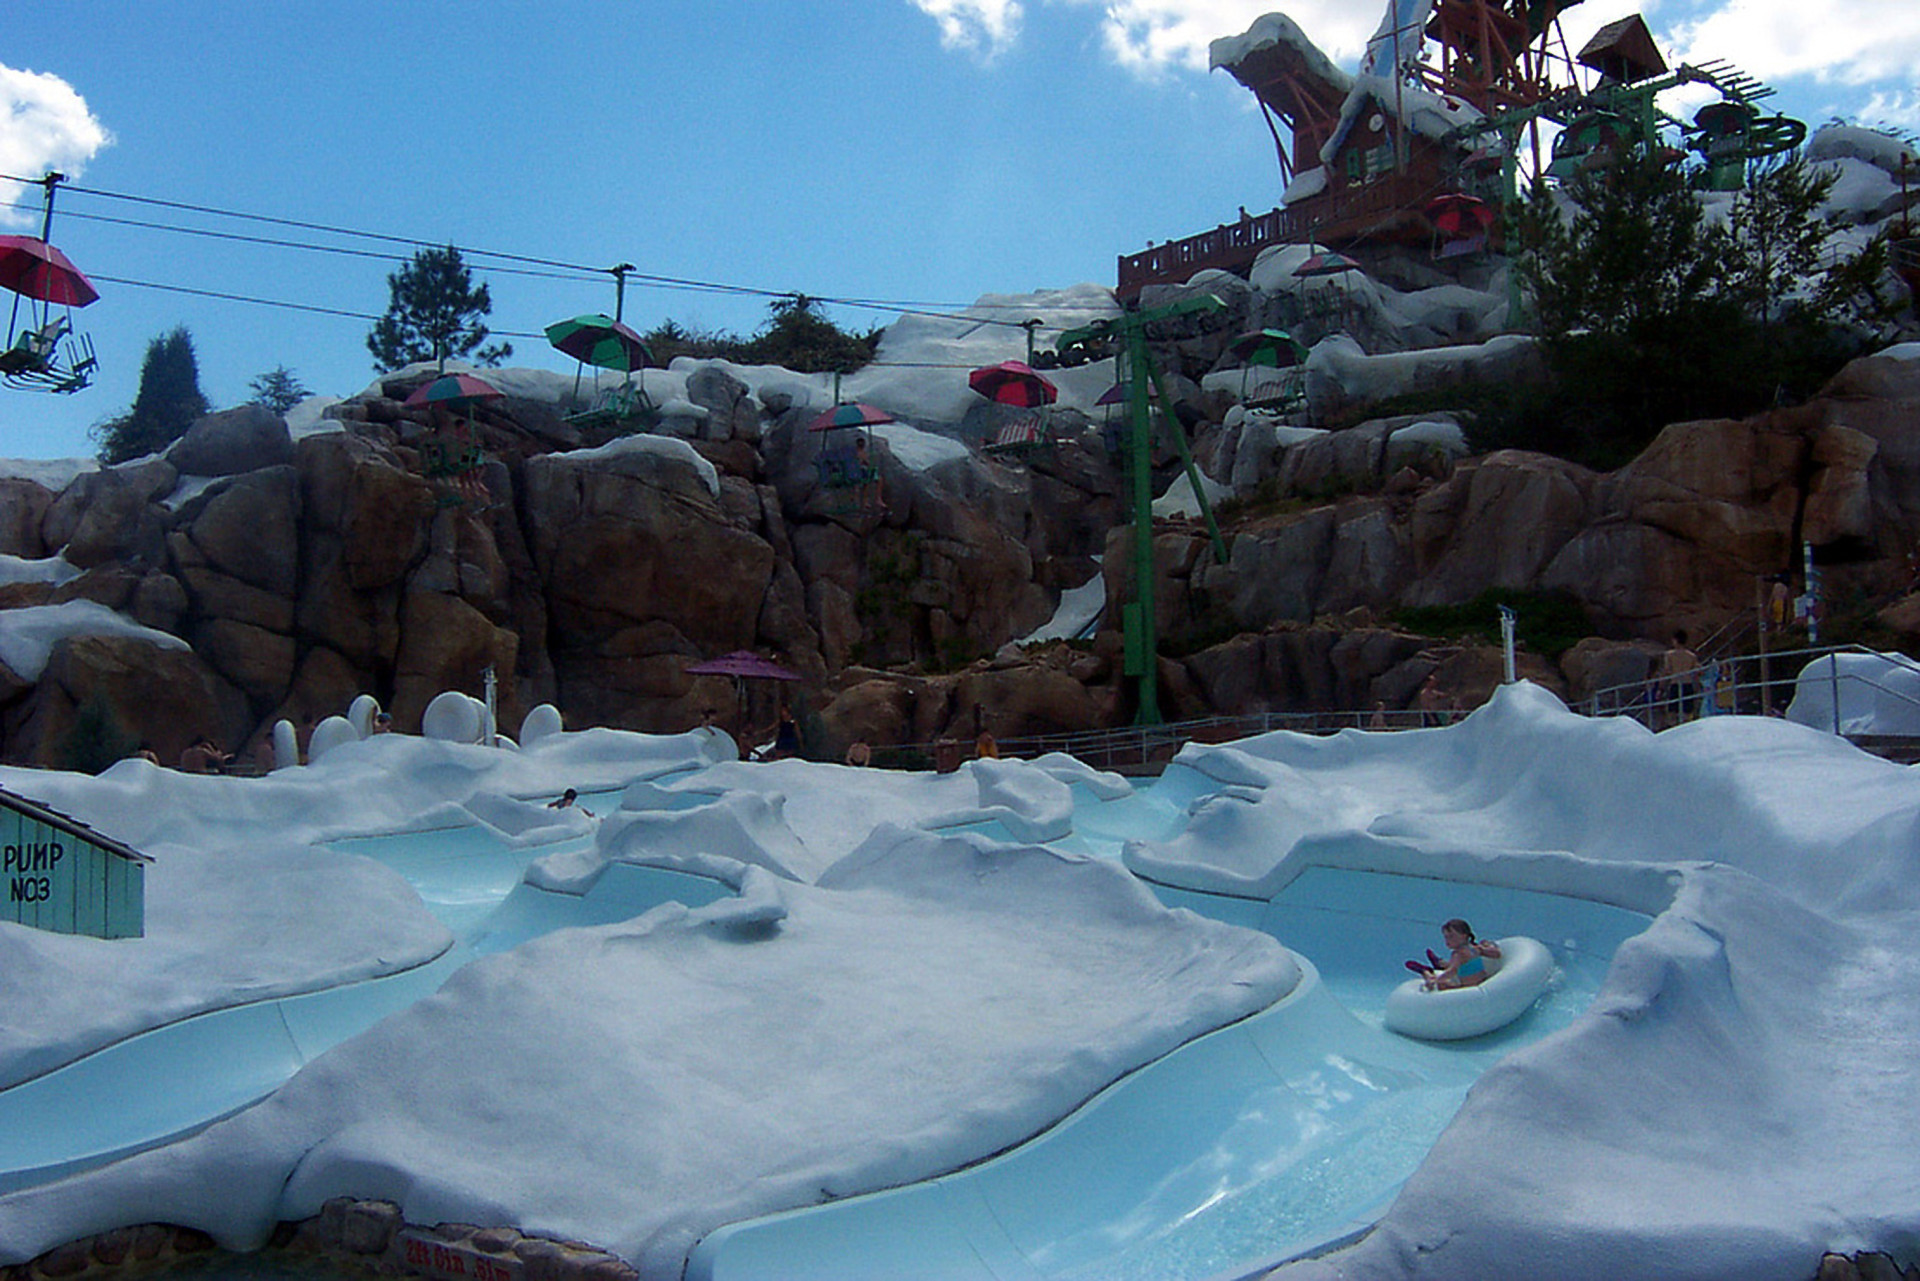 Blizzard Beach is another of Disney's theme parks in Orlando and it welcomes more than two million visitors every year.